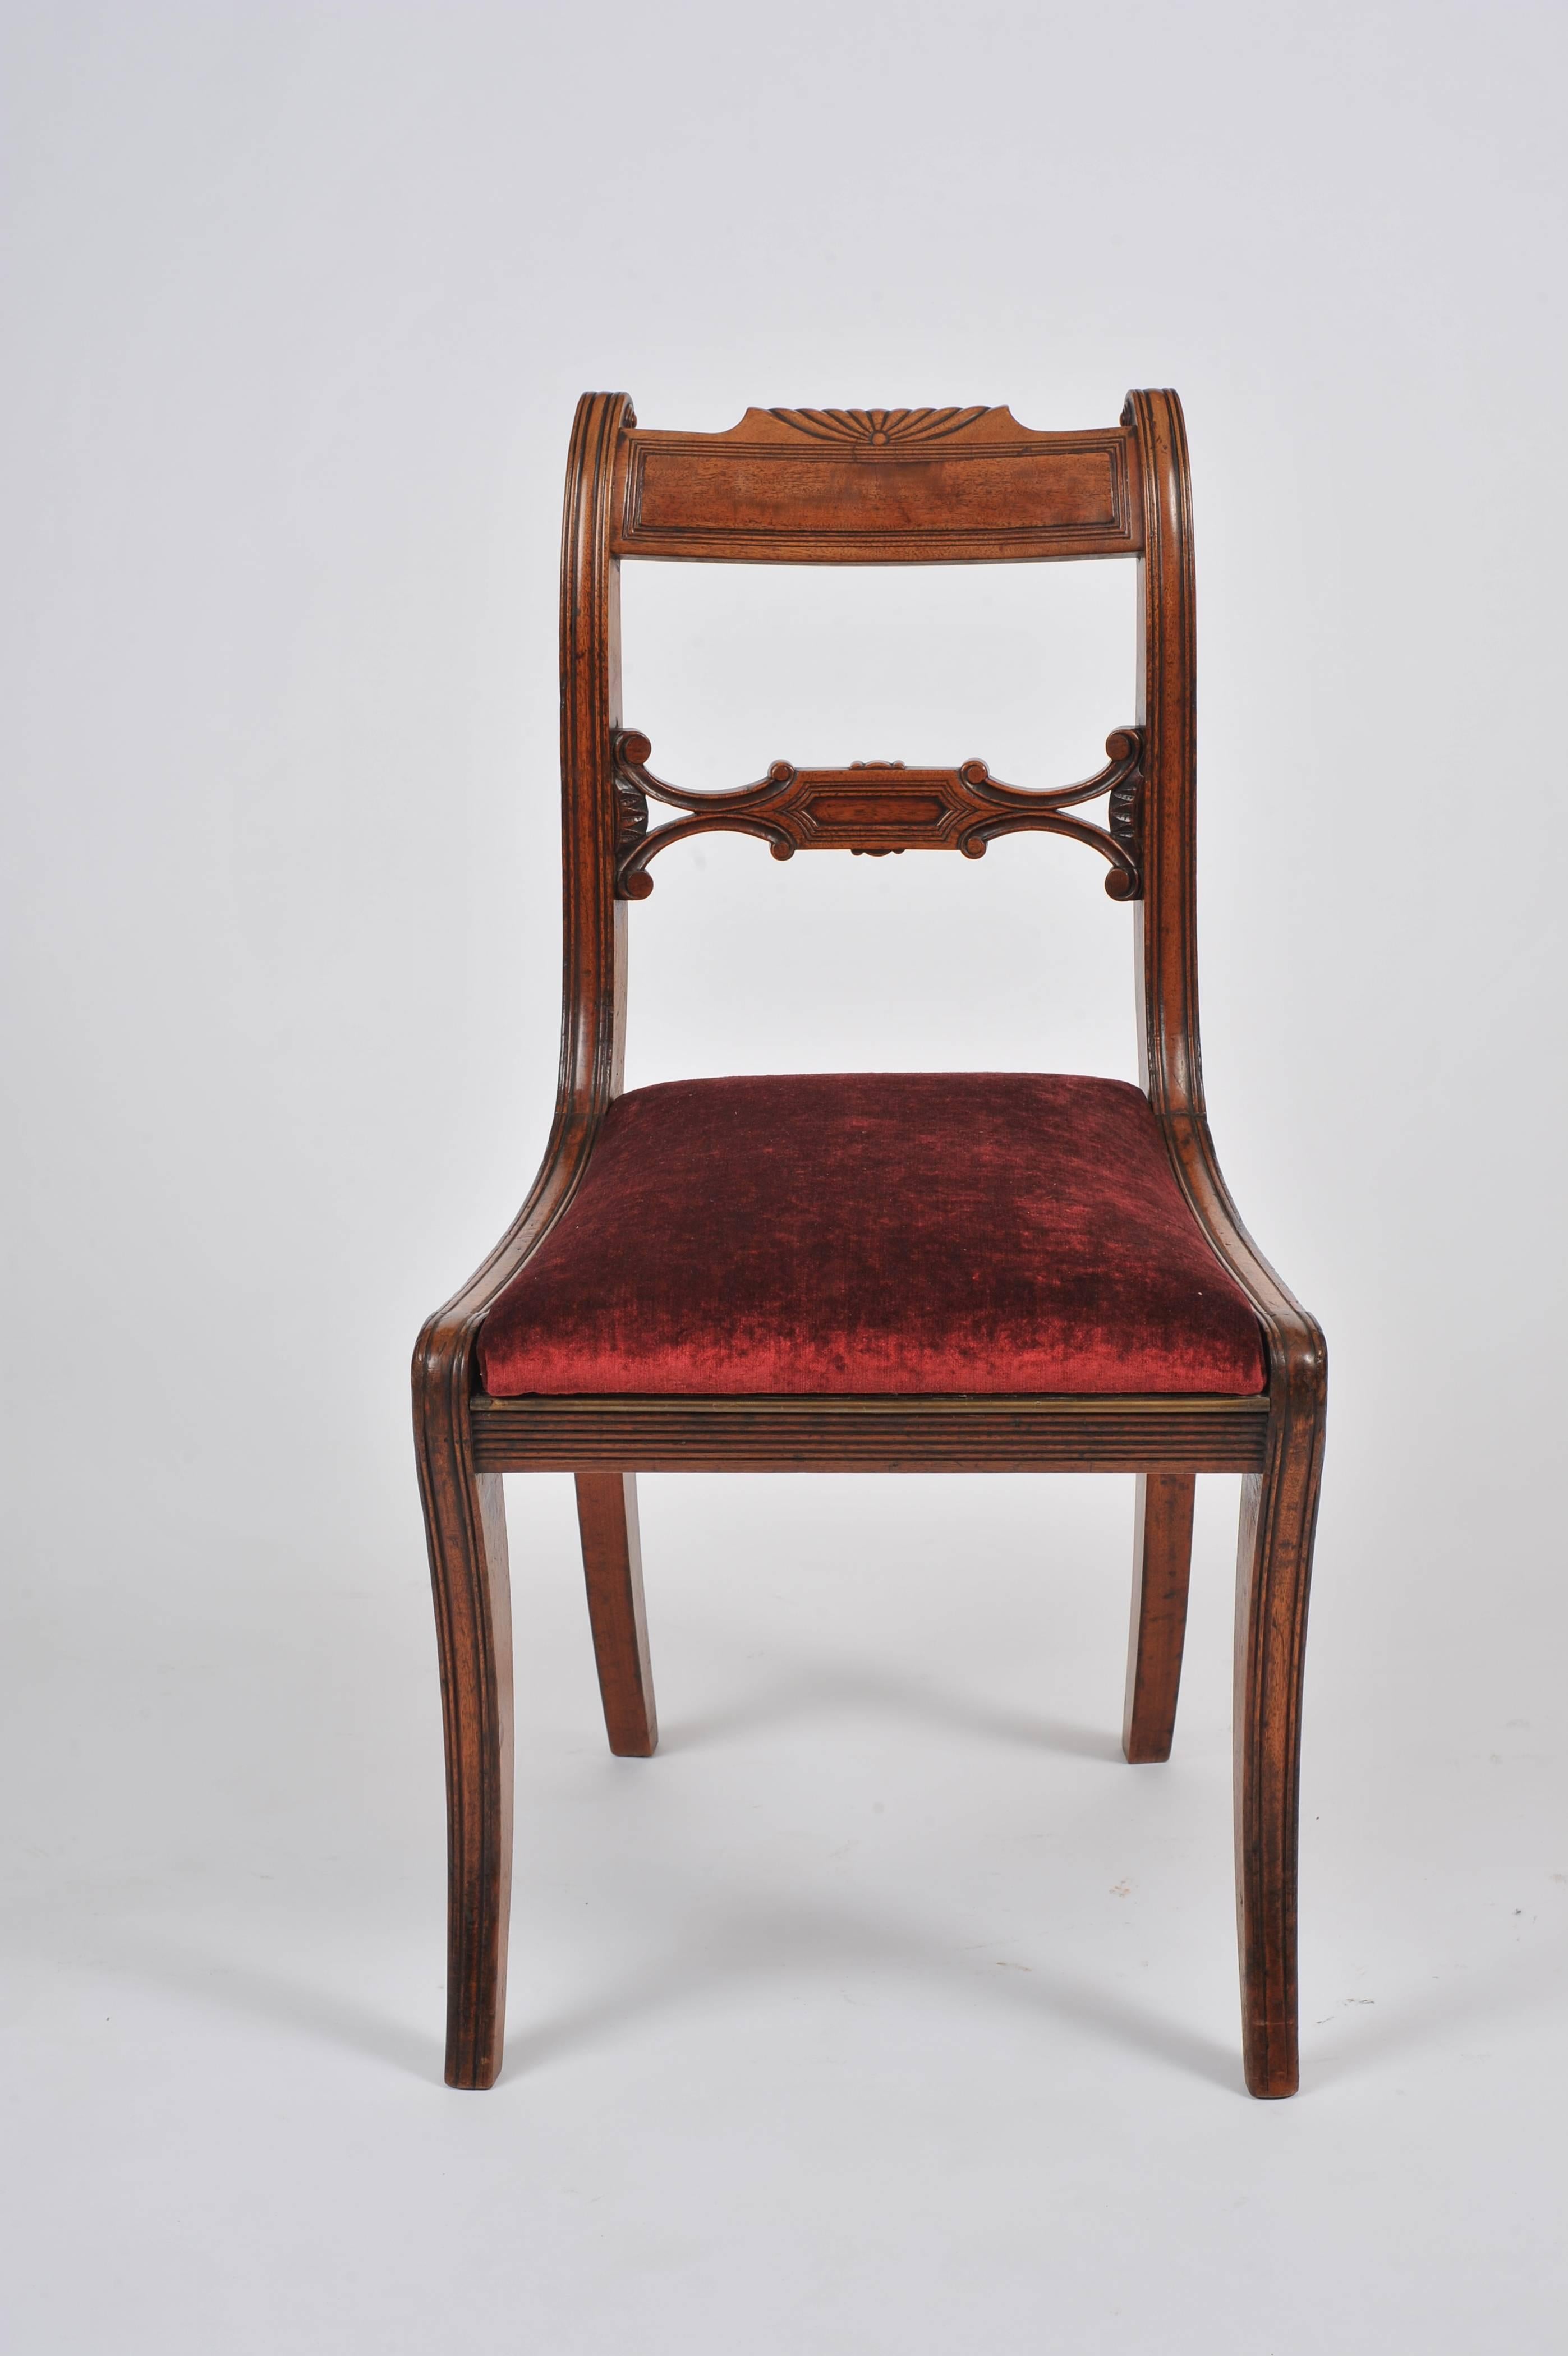 This attractive set of four Regency mahogany sabre leg chairs feature a deep burgundy crushed velvet upholstered drop in seat and scrolled back design. Each chair measures 19 in – 48.2 cm wide, 20 in – 51 cm deep and 37 in – 94 cm in height.